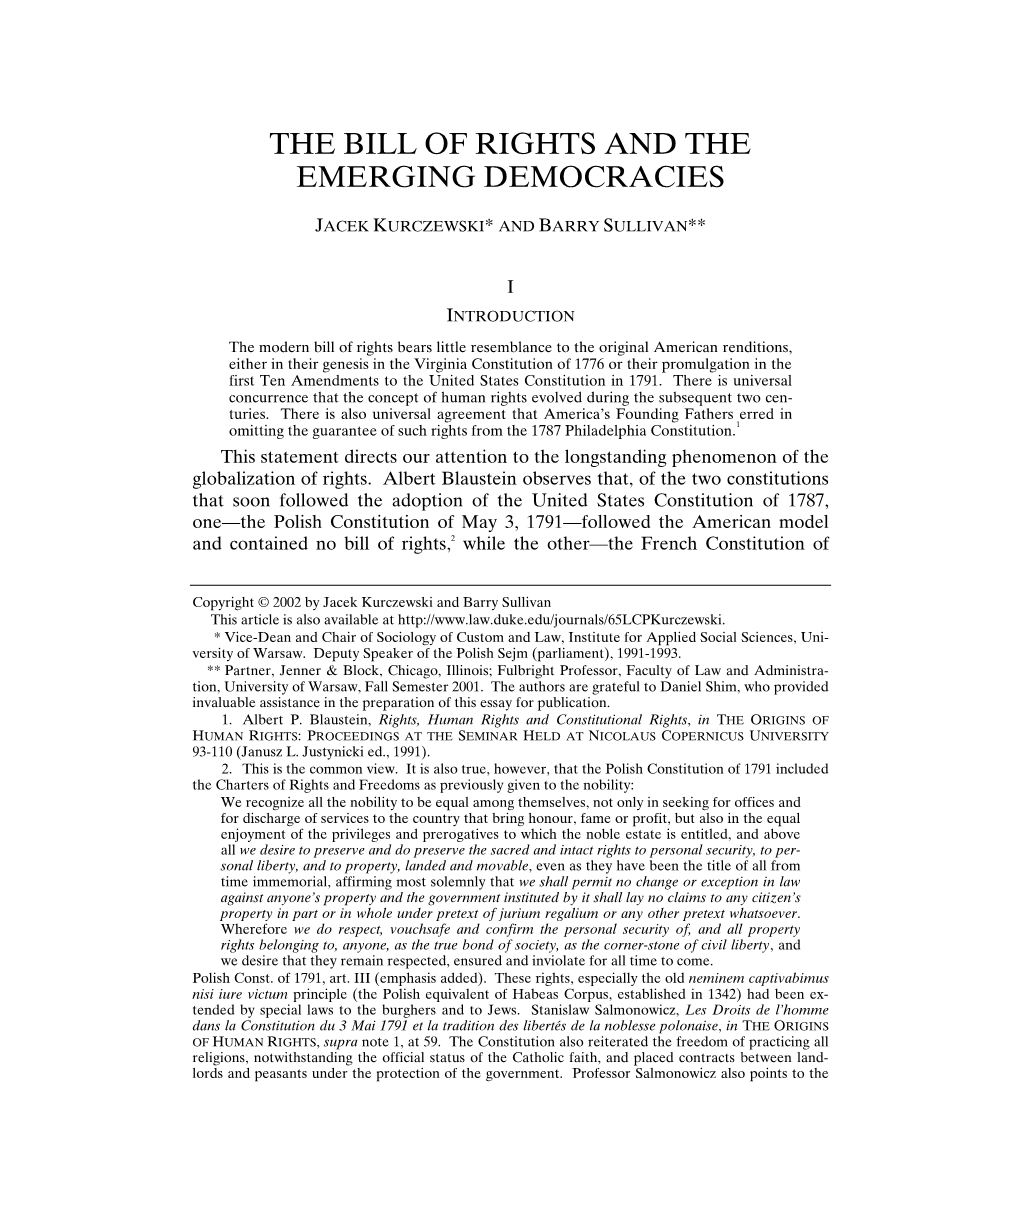 The Bill of Rights and the Emerging Democracies